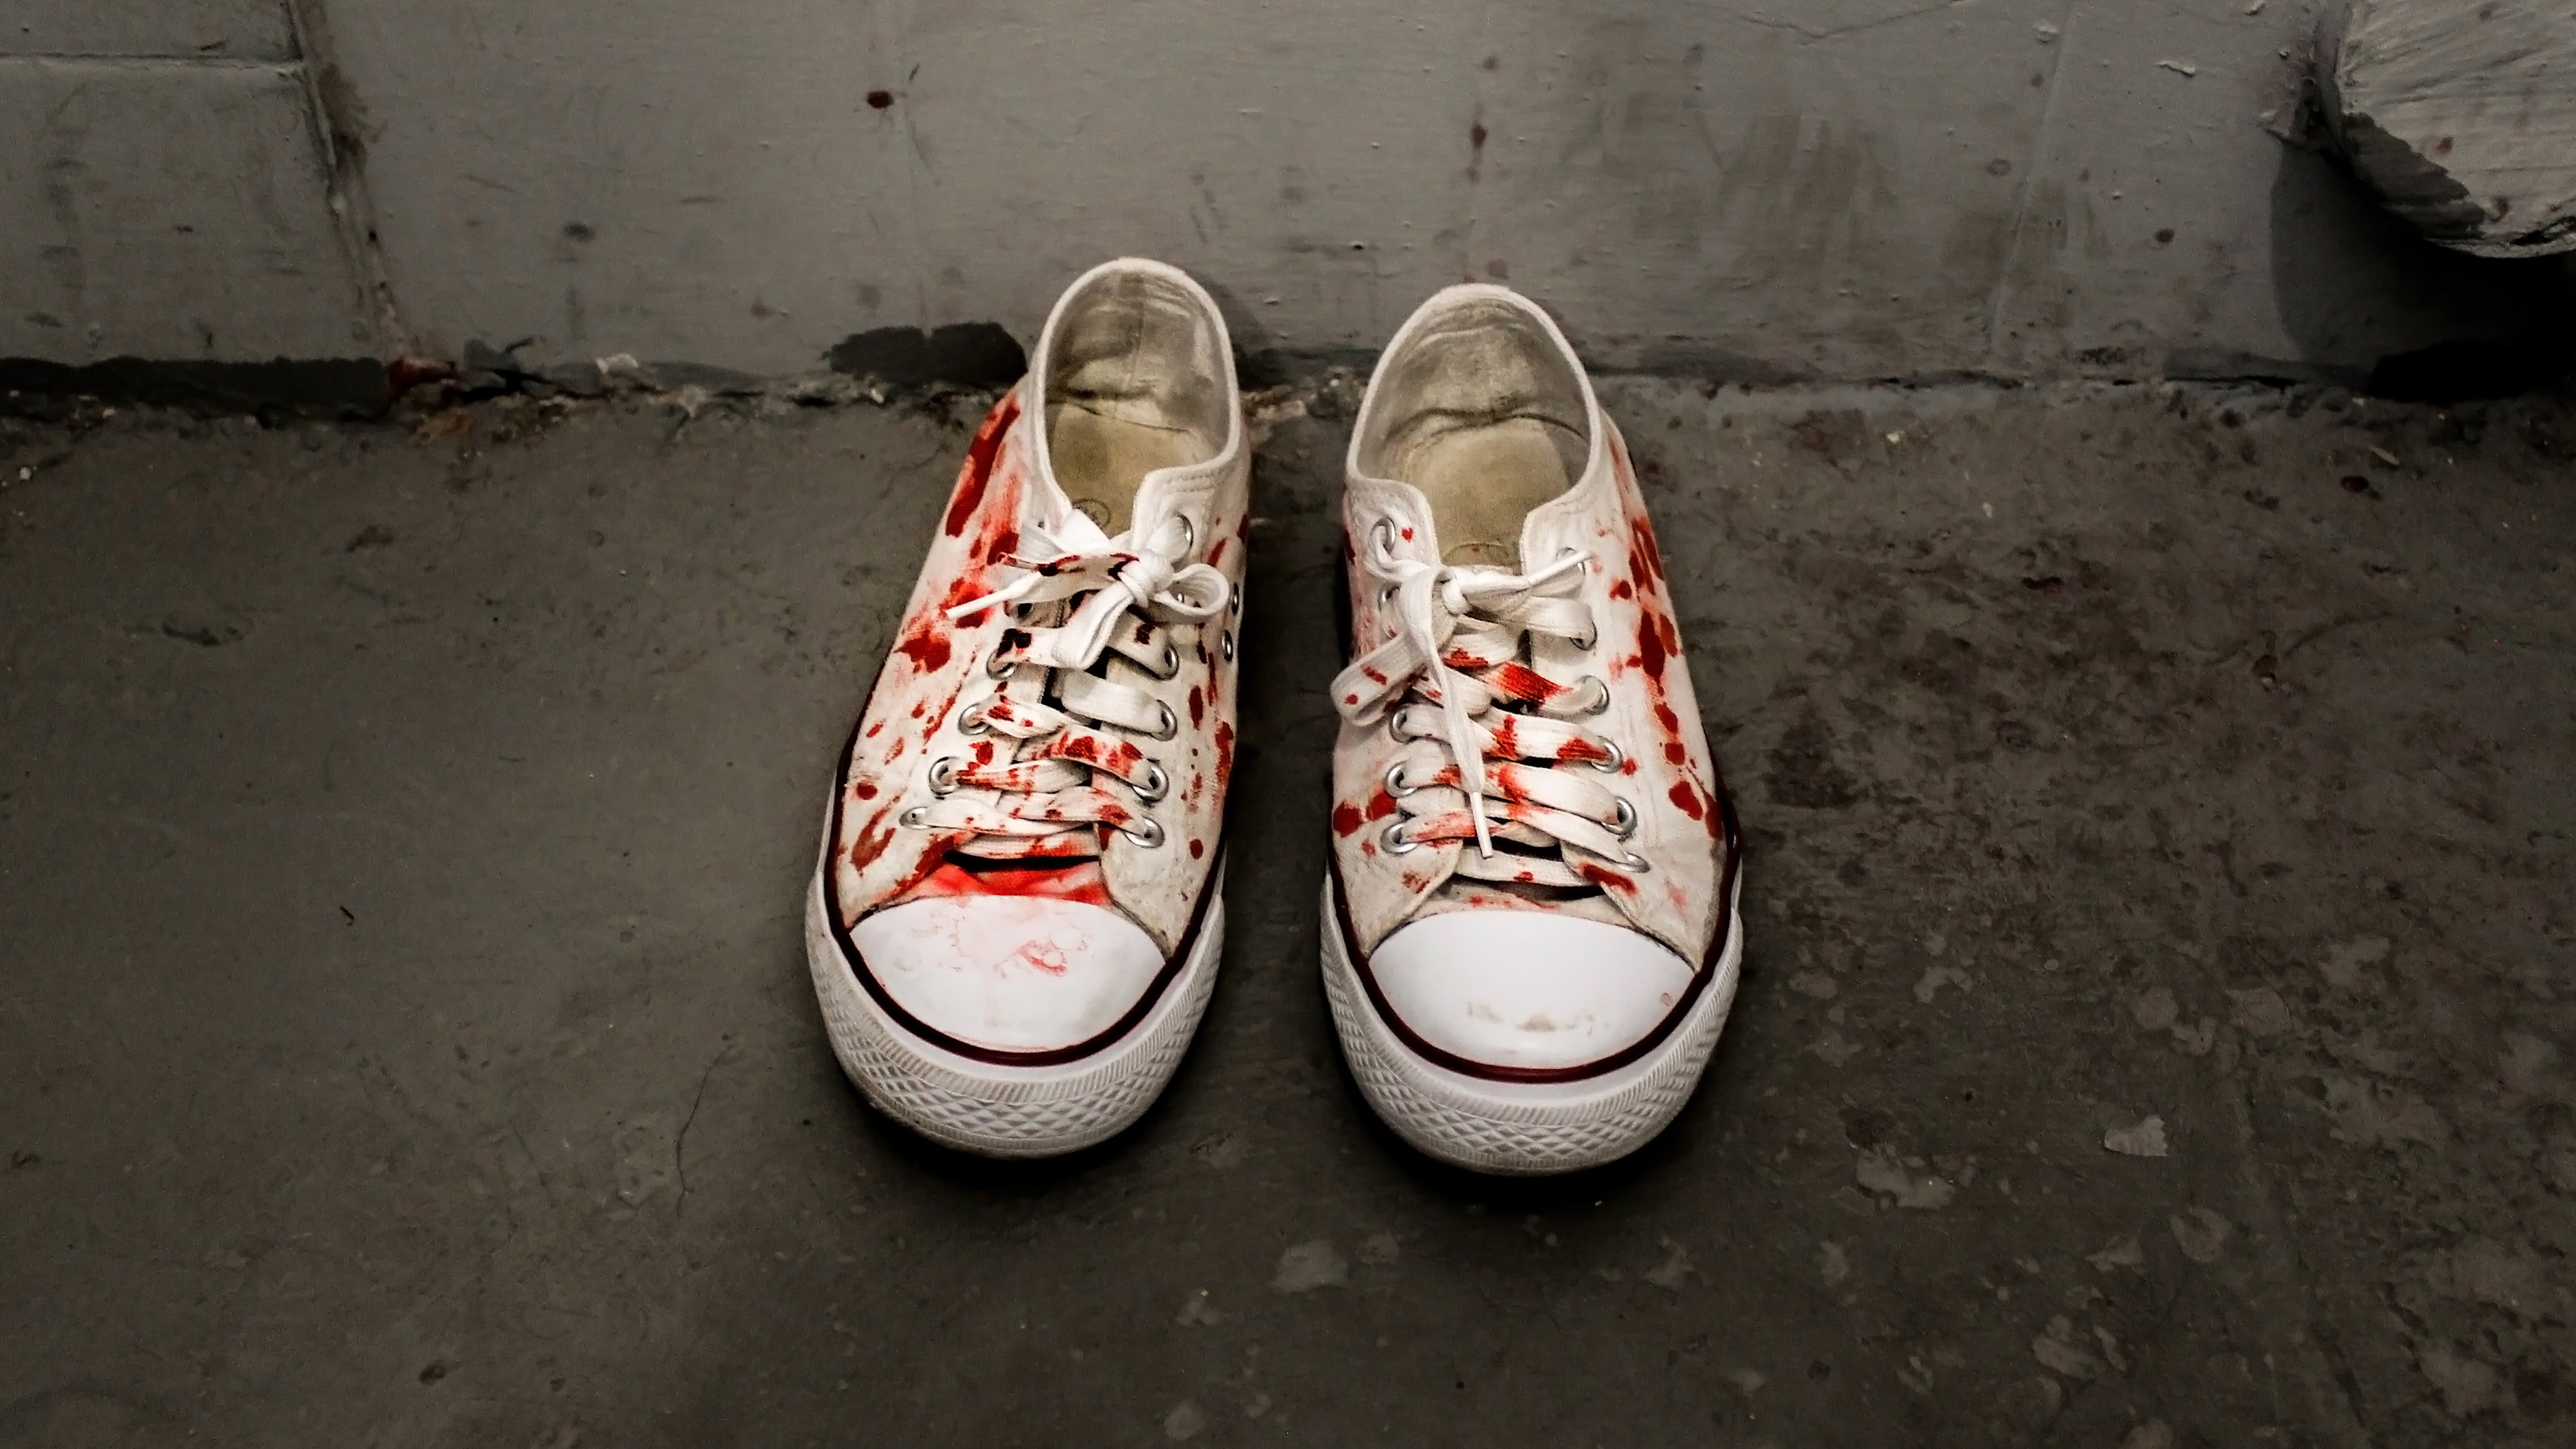 A pair of white canvas shoes with fake blood splattered on them